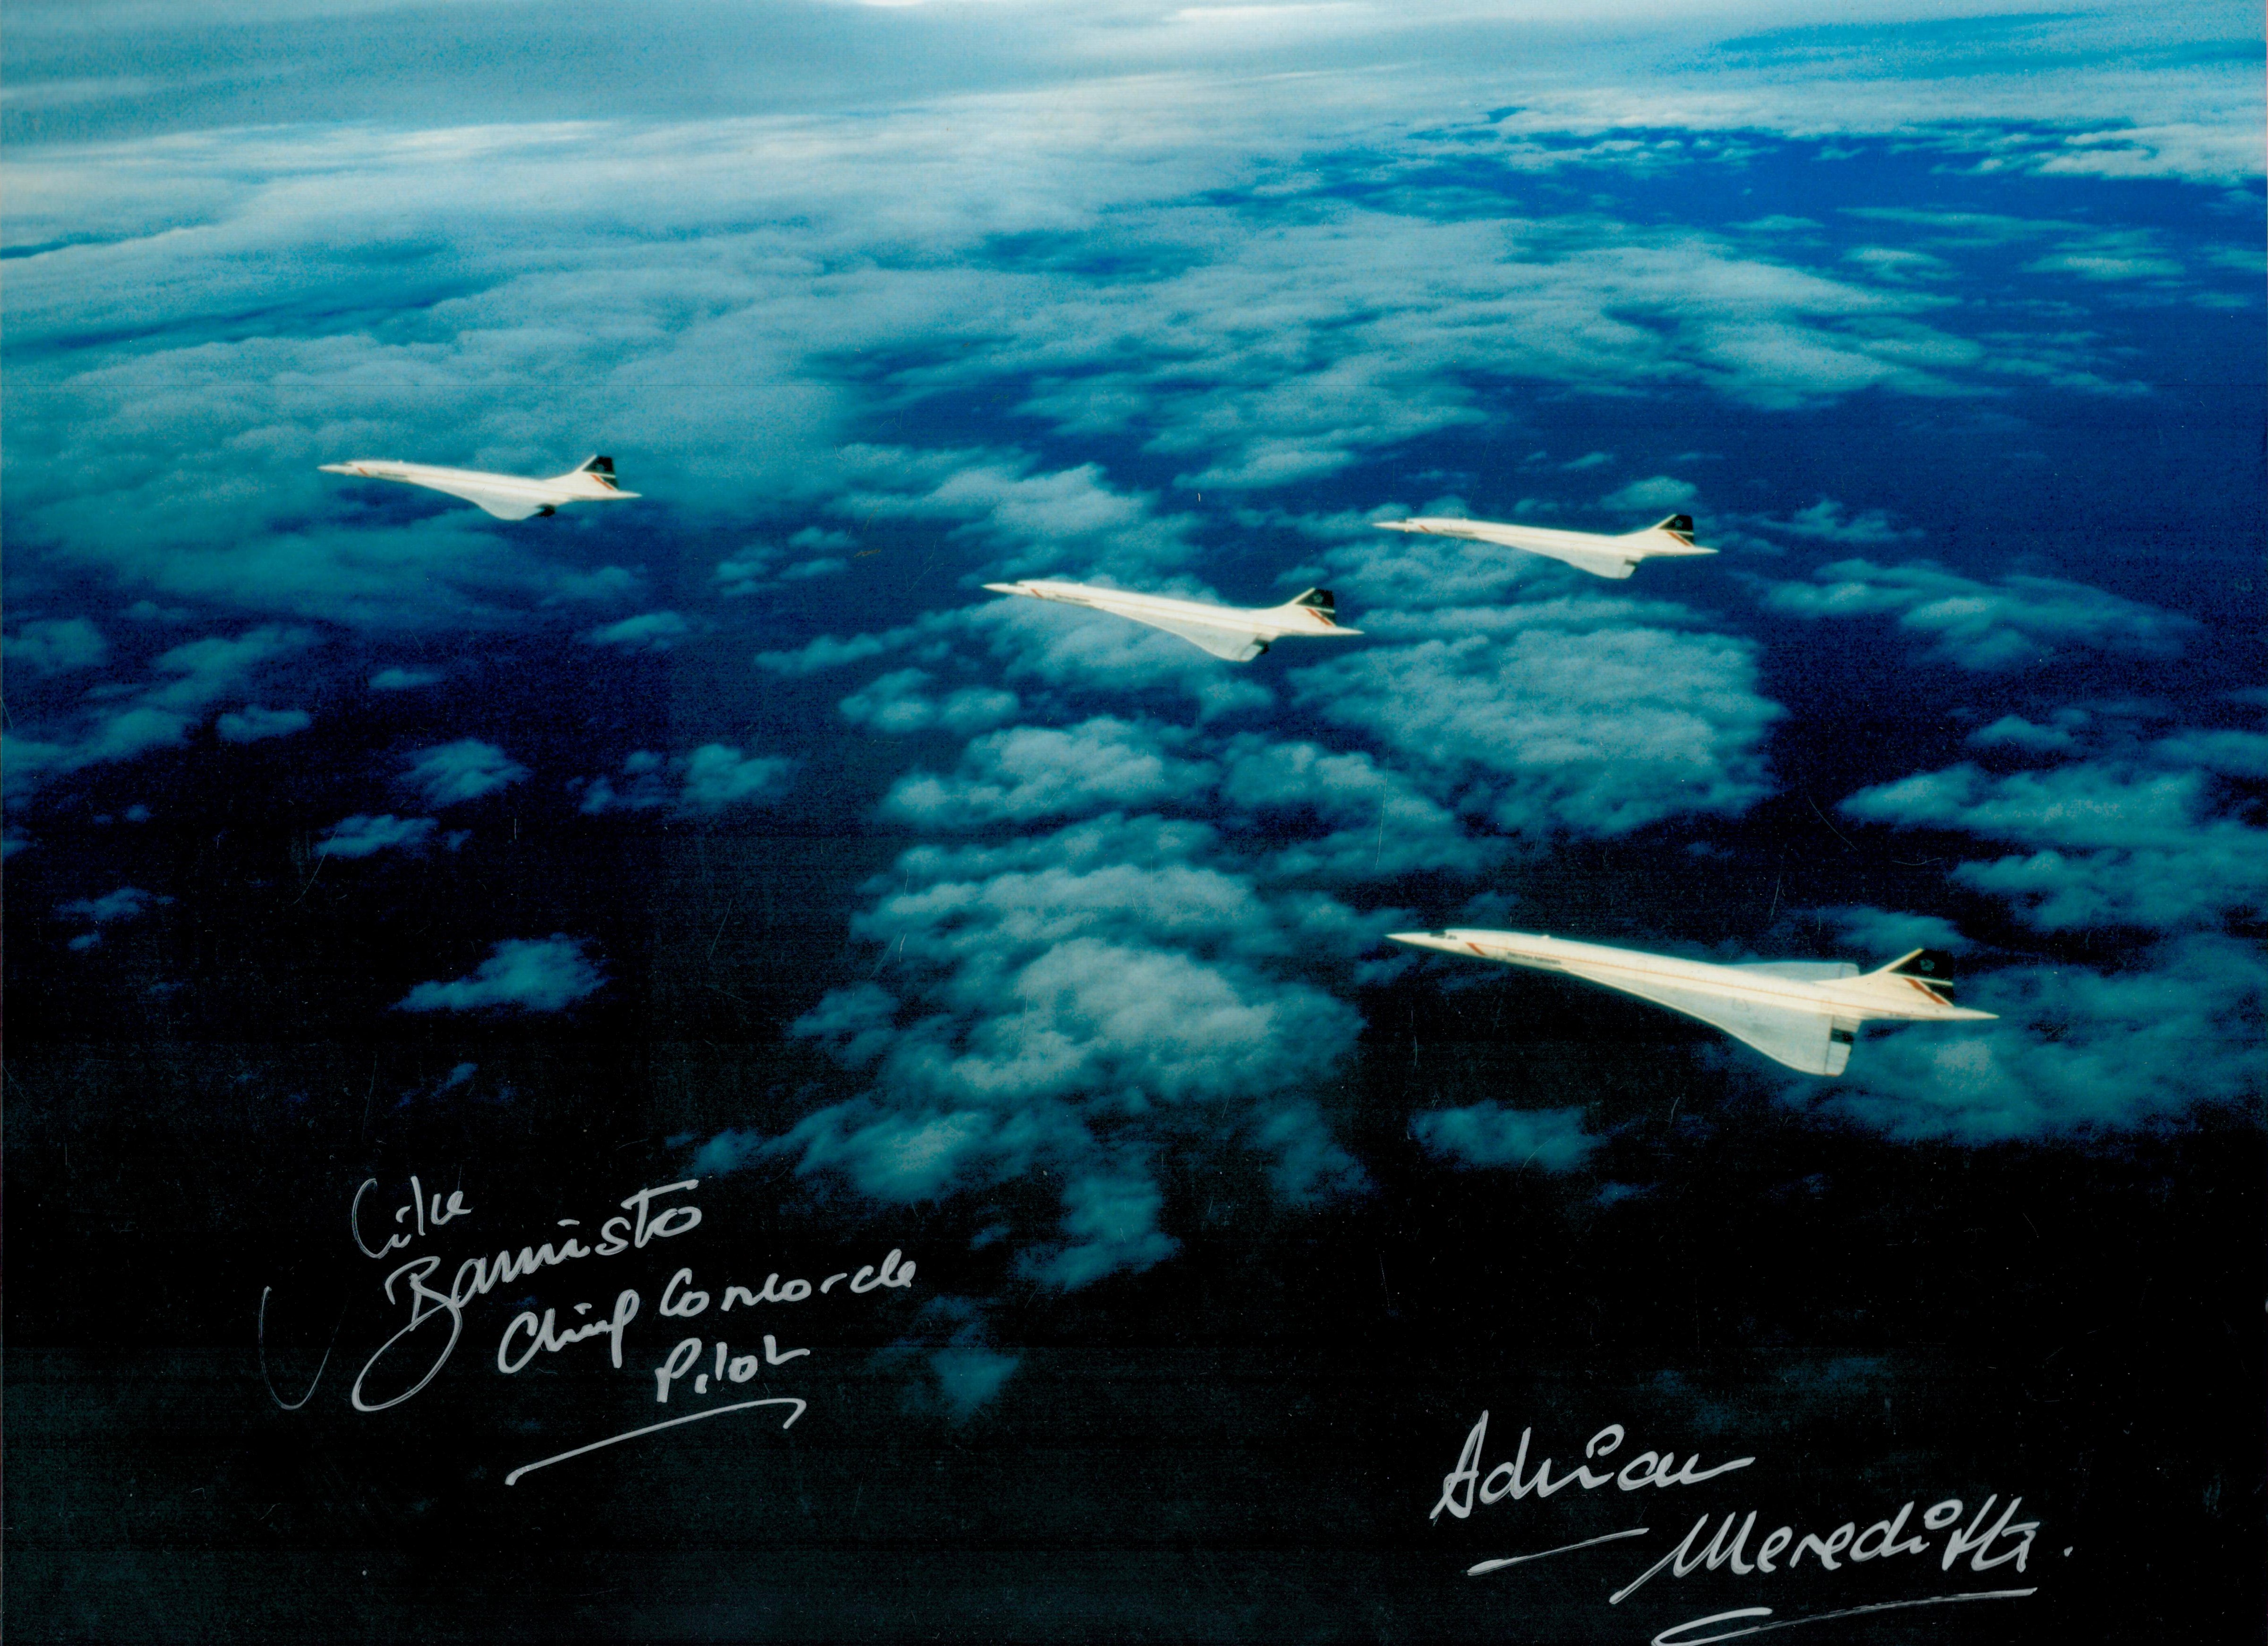 Concorde Chief Pilot Capt Mike Banister and photographer Adrian Meredith signed stunning 16 x 12